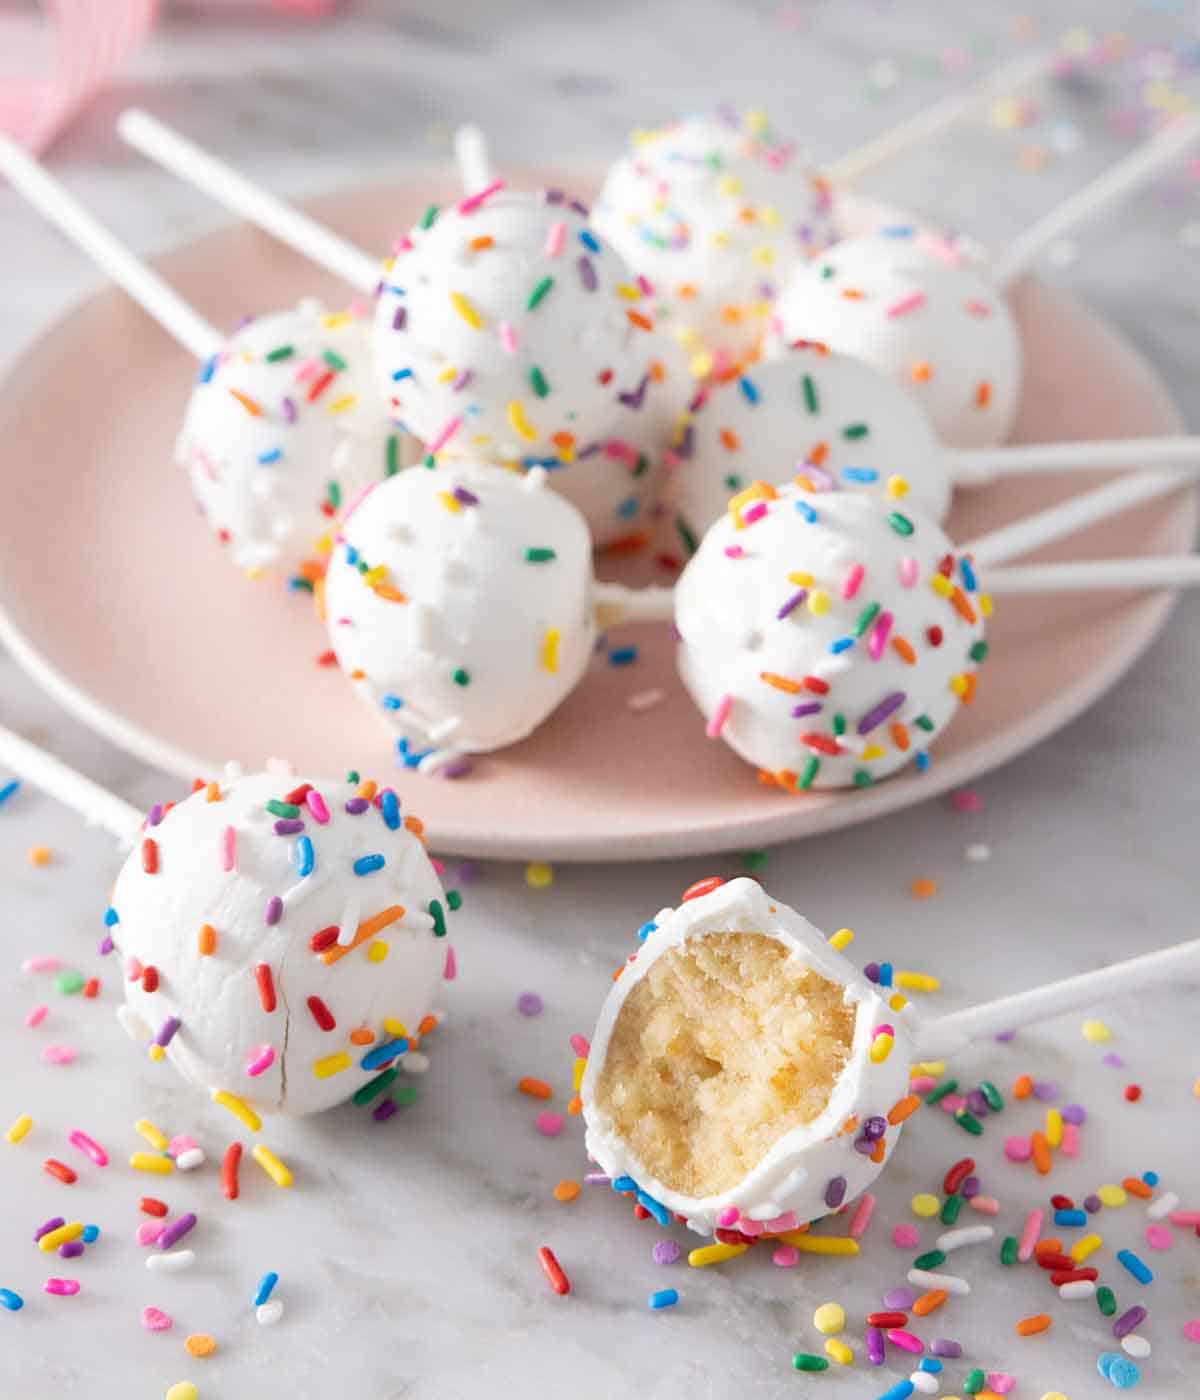 A plate of cake pops with two in front of it, one with a bite taken out.